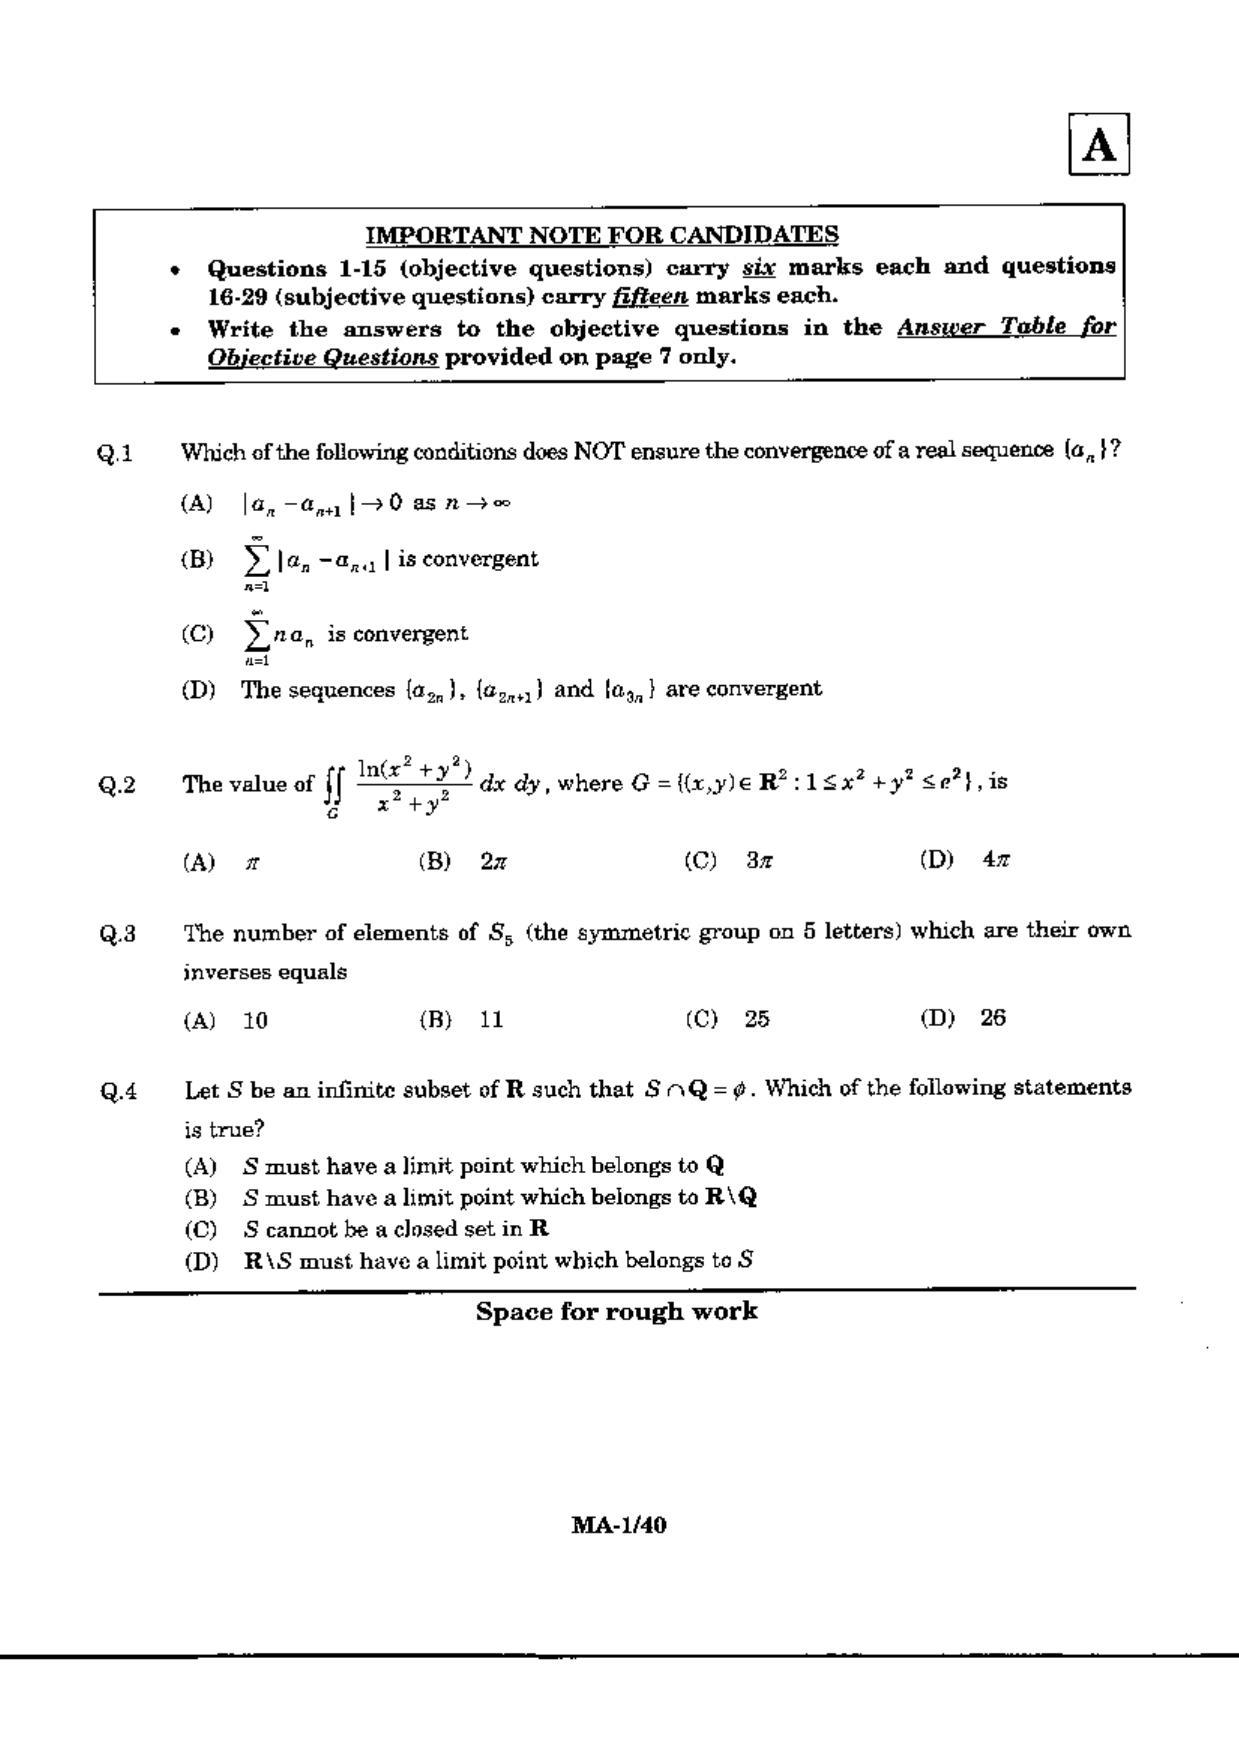 JAM 2010: MA Question Paper - Page 3